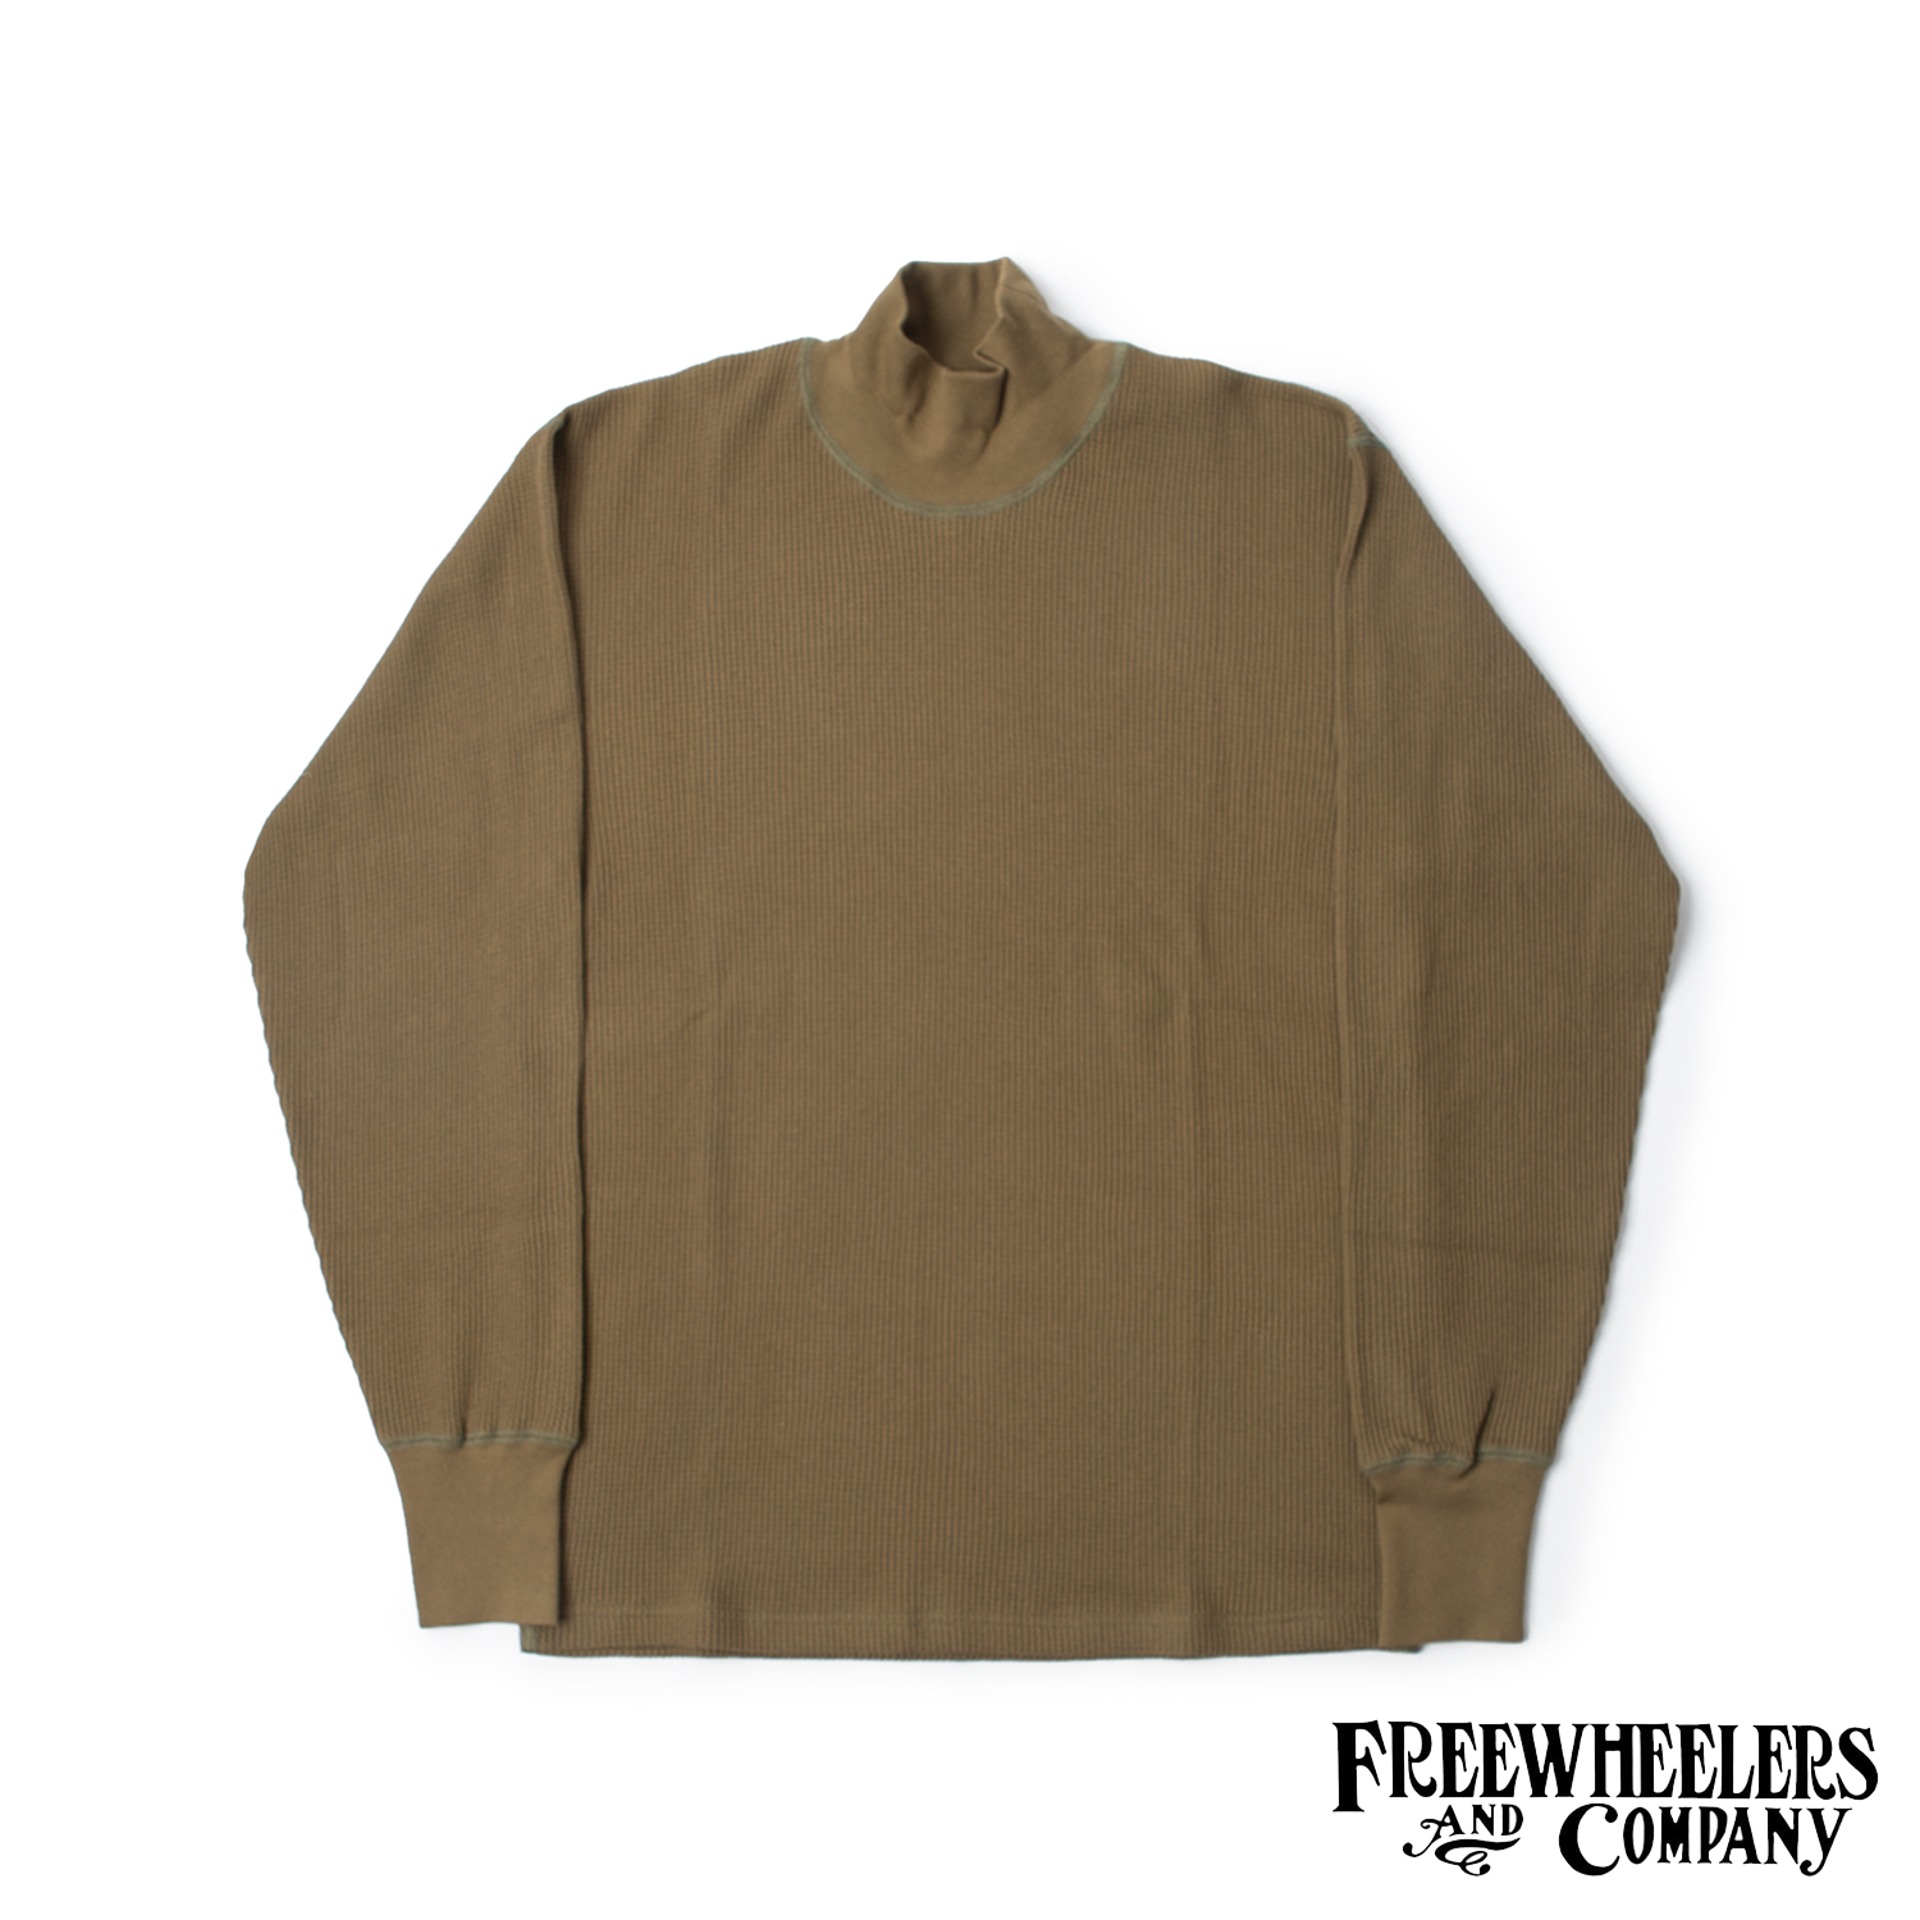 [POWER WEAR]1950s STYLE UNDERWEAR“HIGH NECKED THERMAL”LONG SLEEVE SHIRT (Olive)